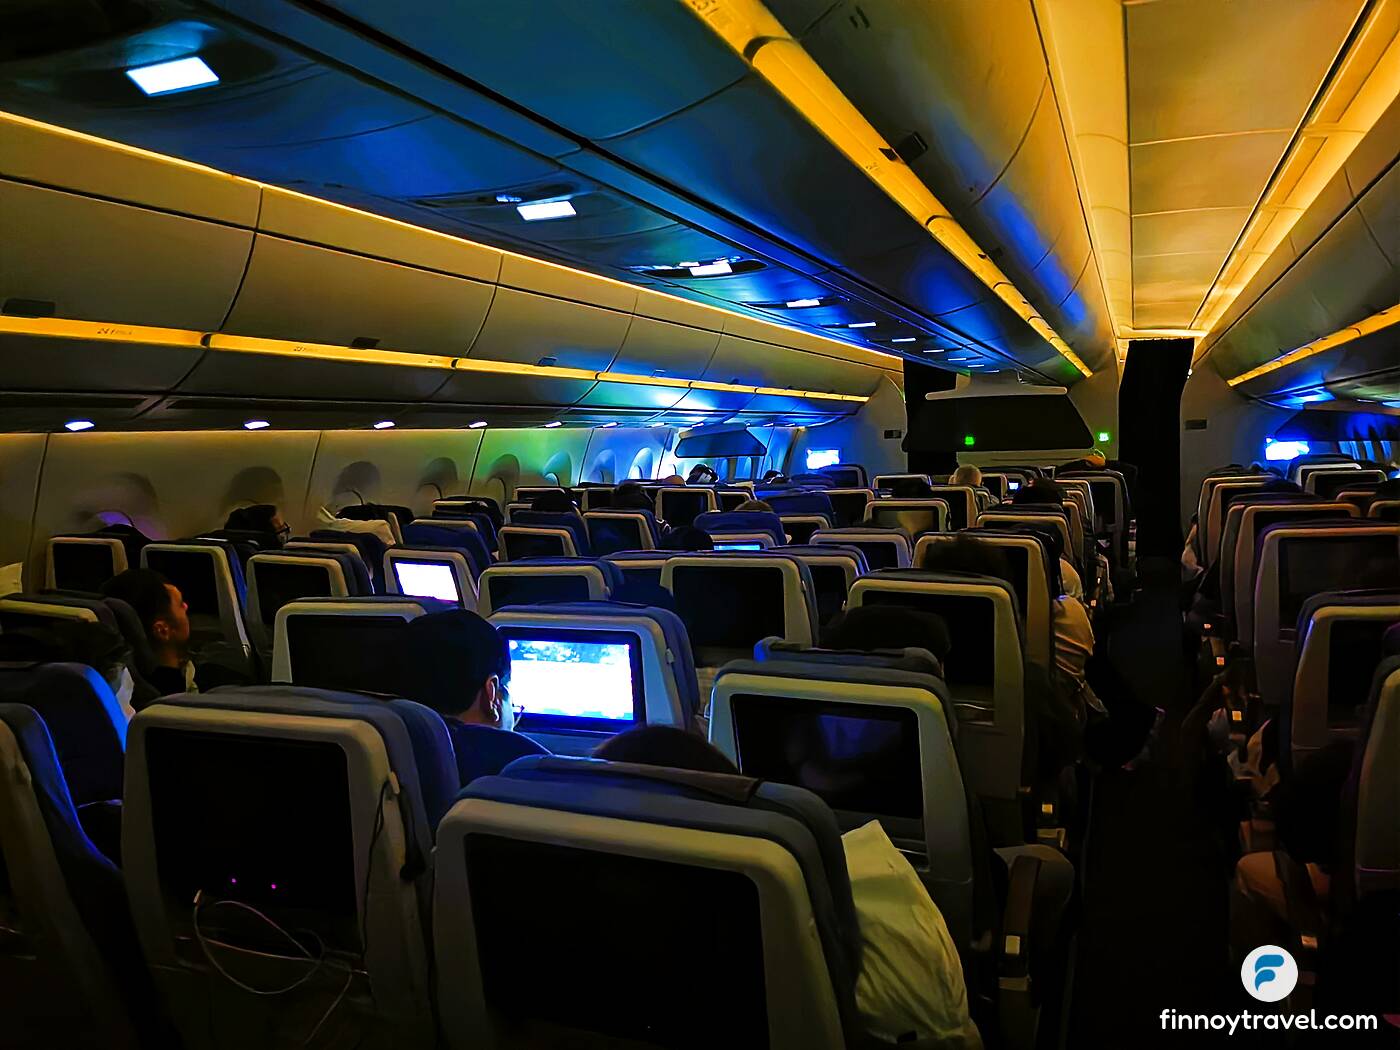 The economy class cabin of A350-900 Lufthansa aircraft.